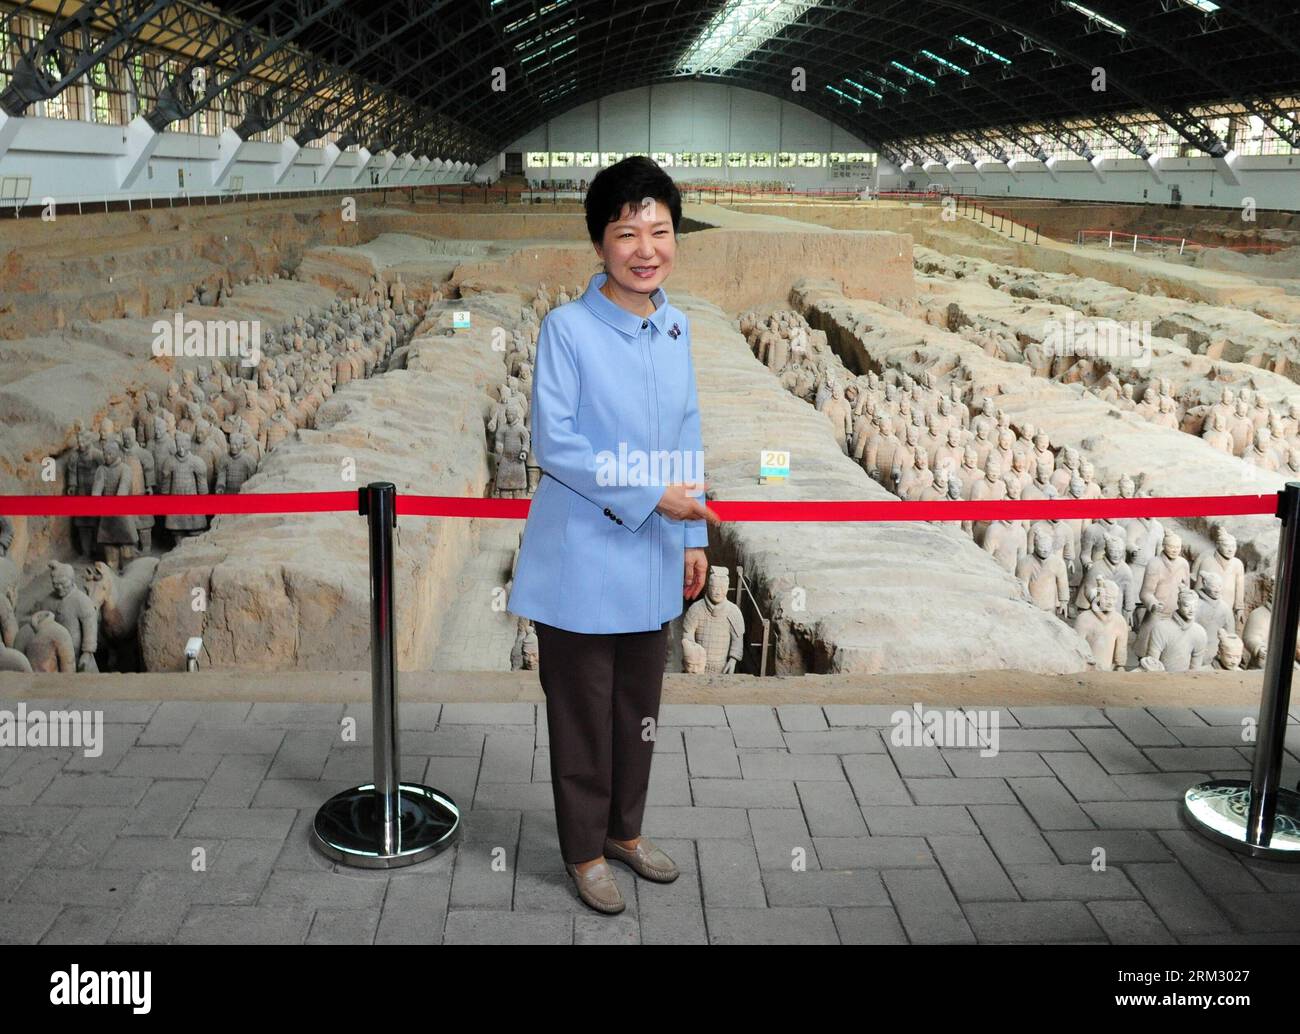 Bildnummer: 59920645  Datum: 30.06.2013  Copyright: imago/Xinhua (130630) -- XI AN, June 30, 2013 (Xinhua) -- Republic of Korea (ROK) President Park Geun-hye visits the ancient terracotta army, buried for centuries to guard the tomb of China s first emperor Qinshihuang of the Qin Dynasty (221 BC-207 BC), in Xi an, capital city of northwest China s Shaanxi Province, on June 30, 2013. (Xinhua/Ding Haitao) (ry) CHINA-XI AN-ROK PRESIDENT-ARRIVE (CN) PUBLICATIONxNOTxINxCHN Politik people Südkorea Terrakotta Armee Soldat xas x0x 2013 quer premiumd      59920645 Date 30 06 2013 Copyright Imago XINHUA Stock Photo